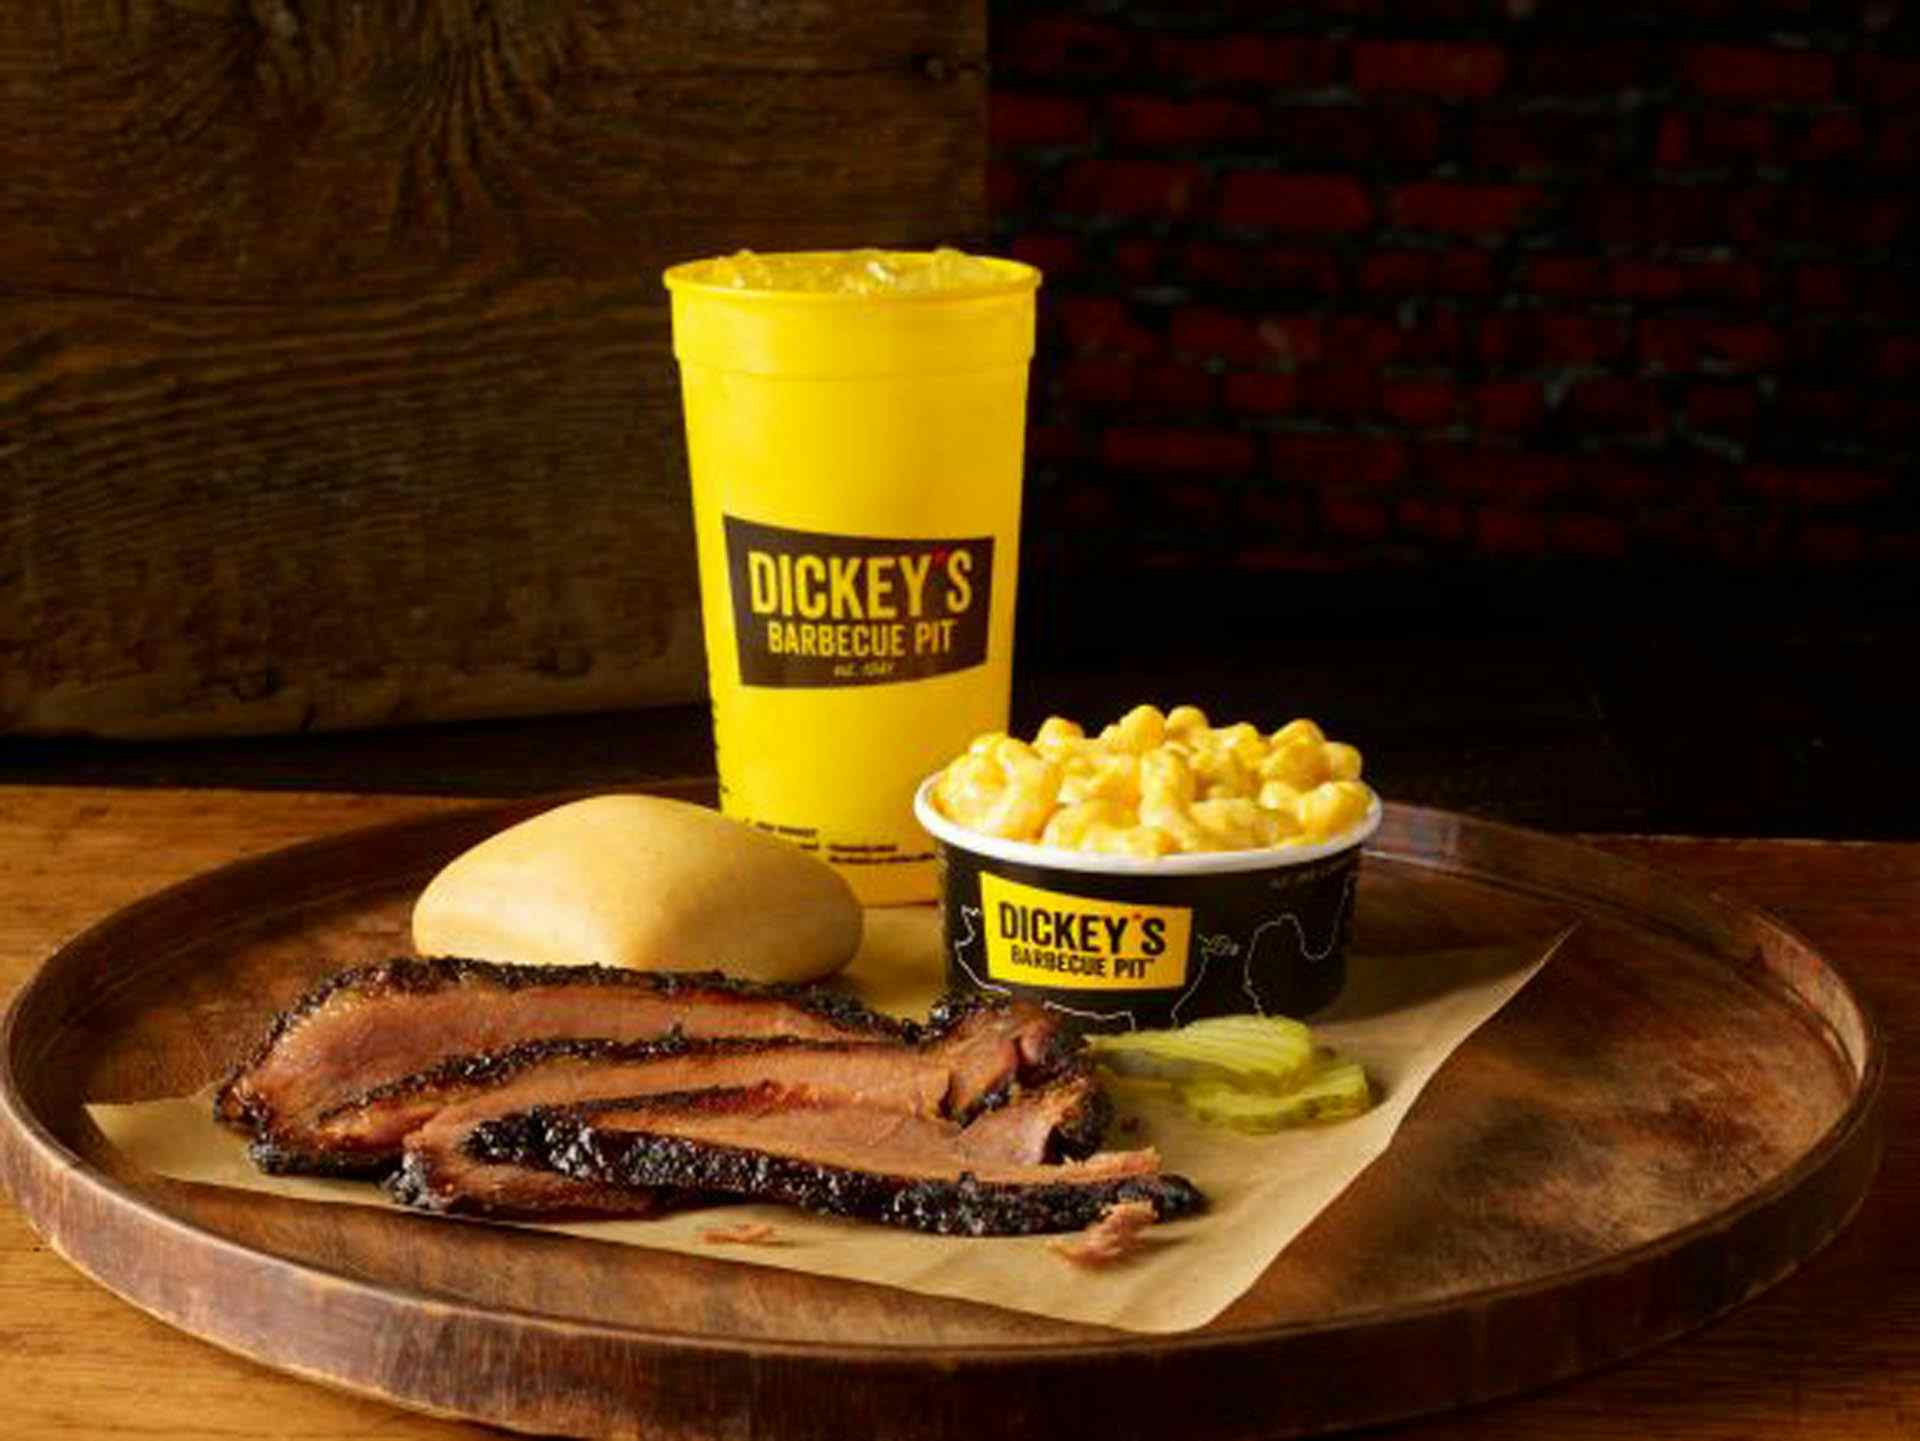 Restaurant News: Dickey’s Barbecue Pit Owner Brings New Location to Pearland, TX